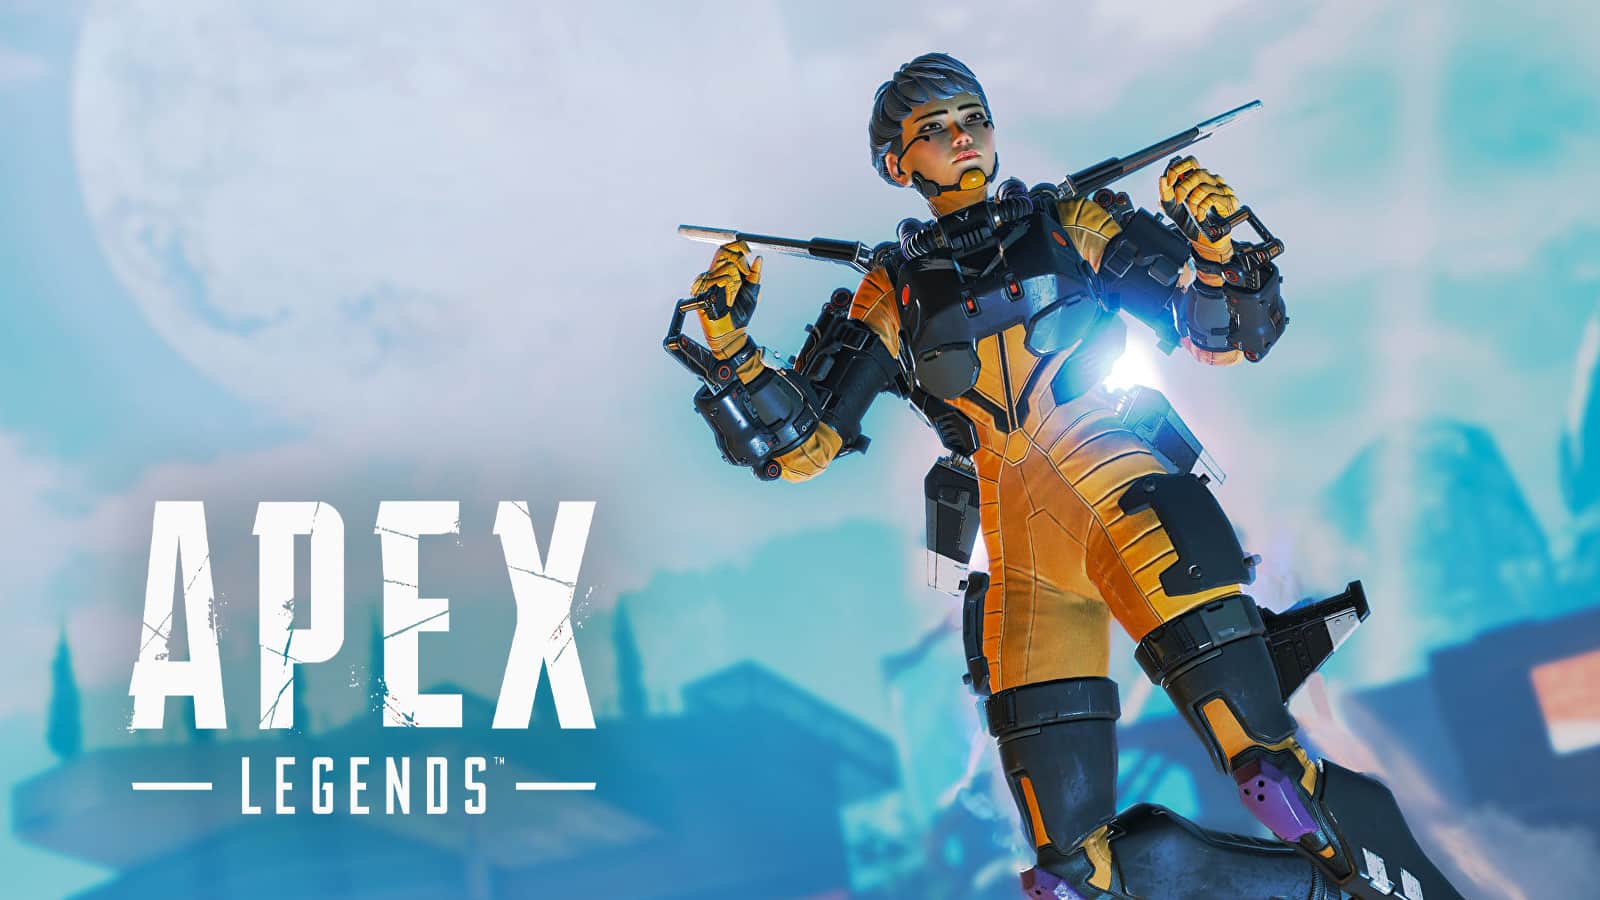 Valkyrie flying in Apex Legends